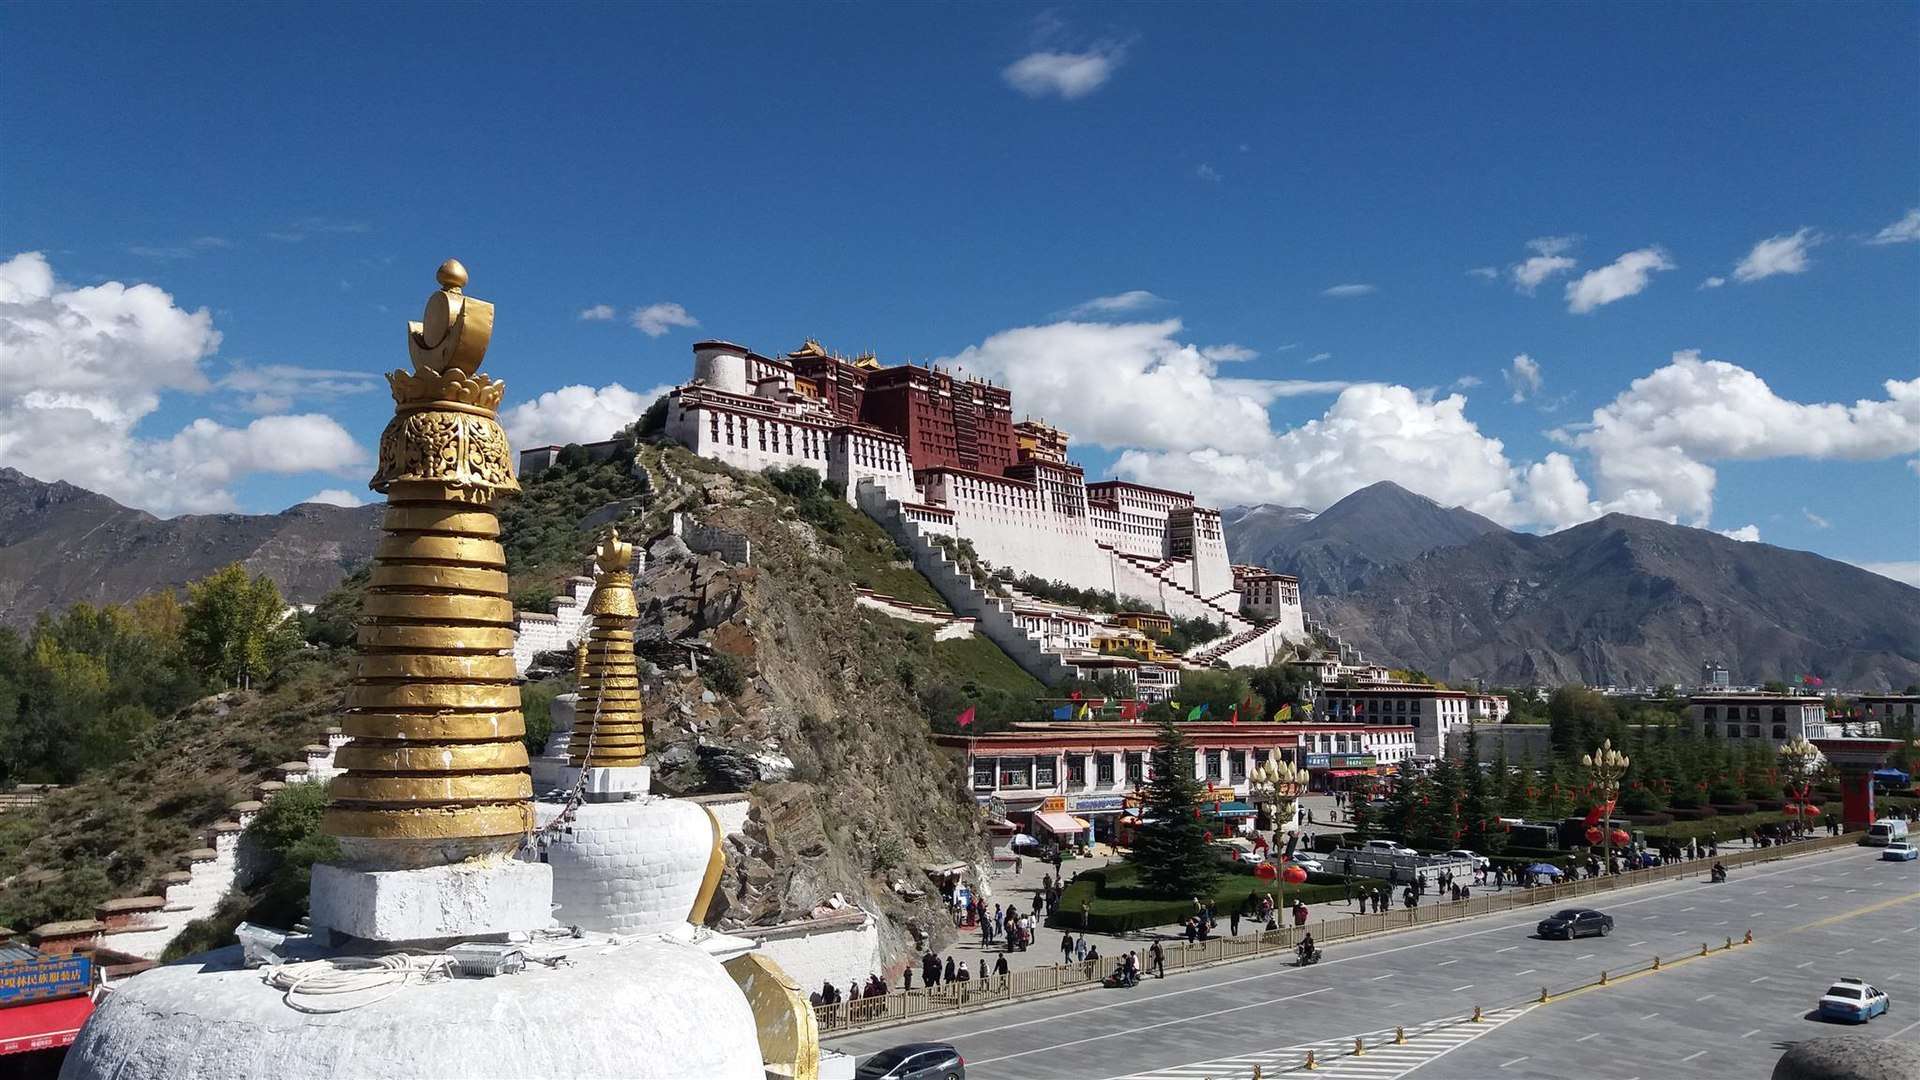 Lhasa's Potala Palace, today a UNESCO World Heritage site, pictured in 2019